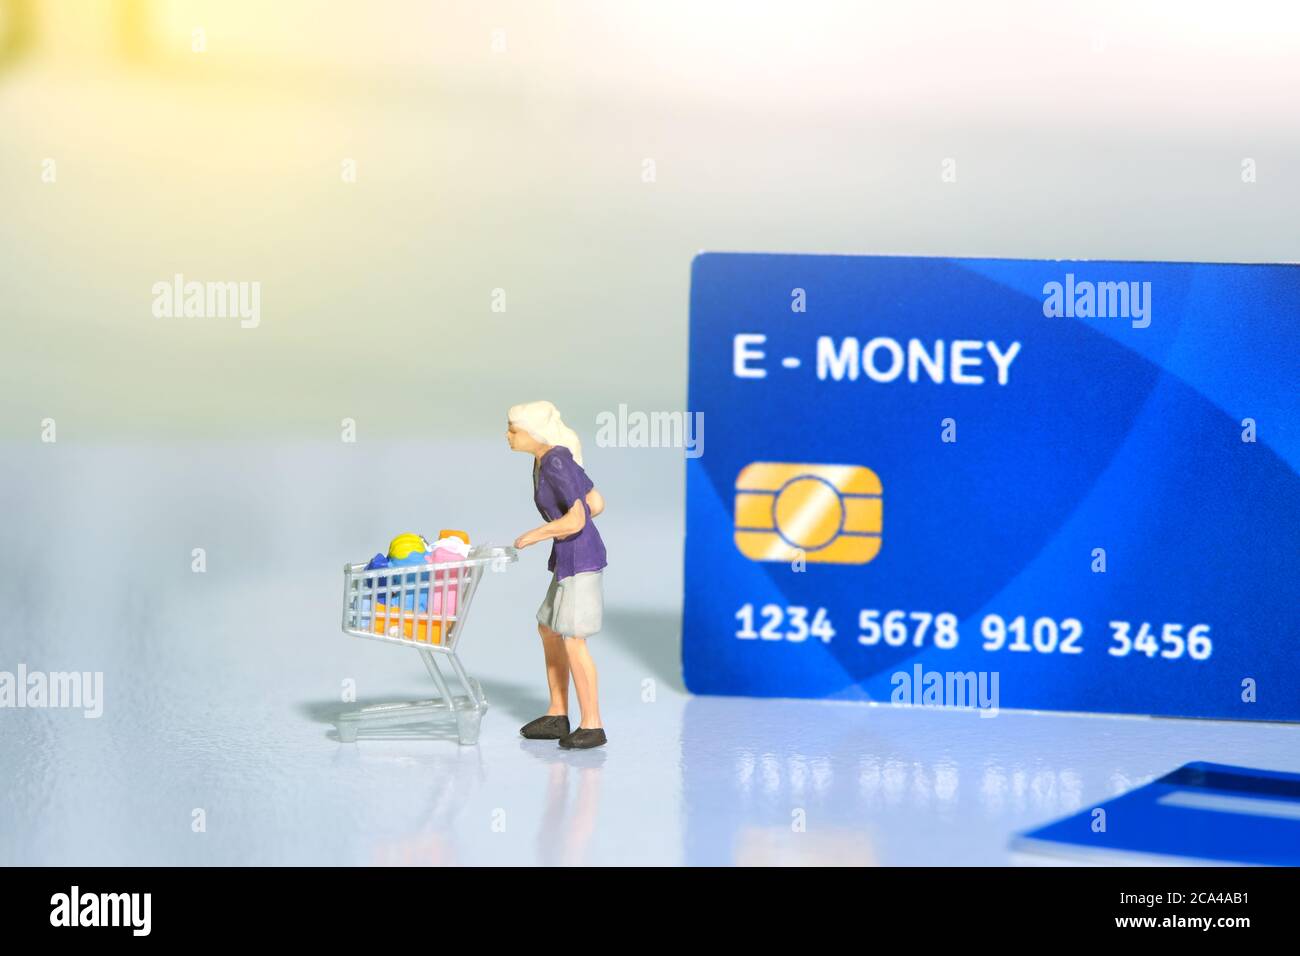 Contact-less payment. Women going shop and pay using electronic money (e-money). Miniature people figurines toys conceptual photography. Stock Photo